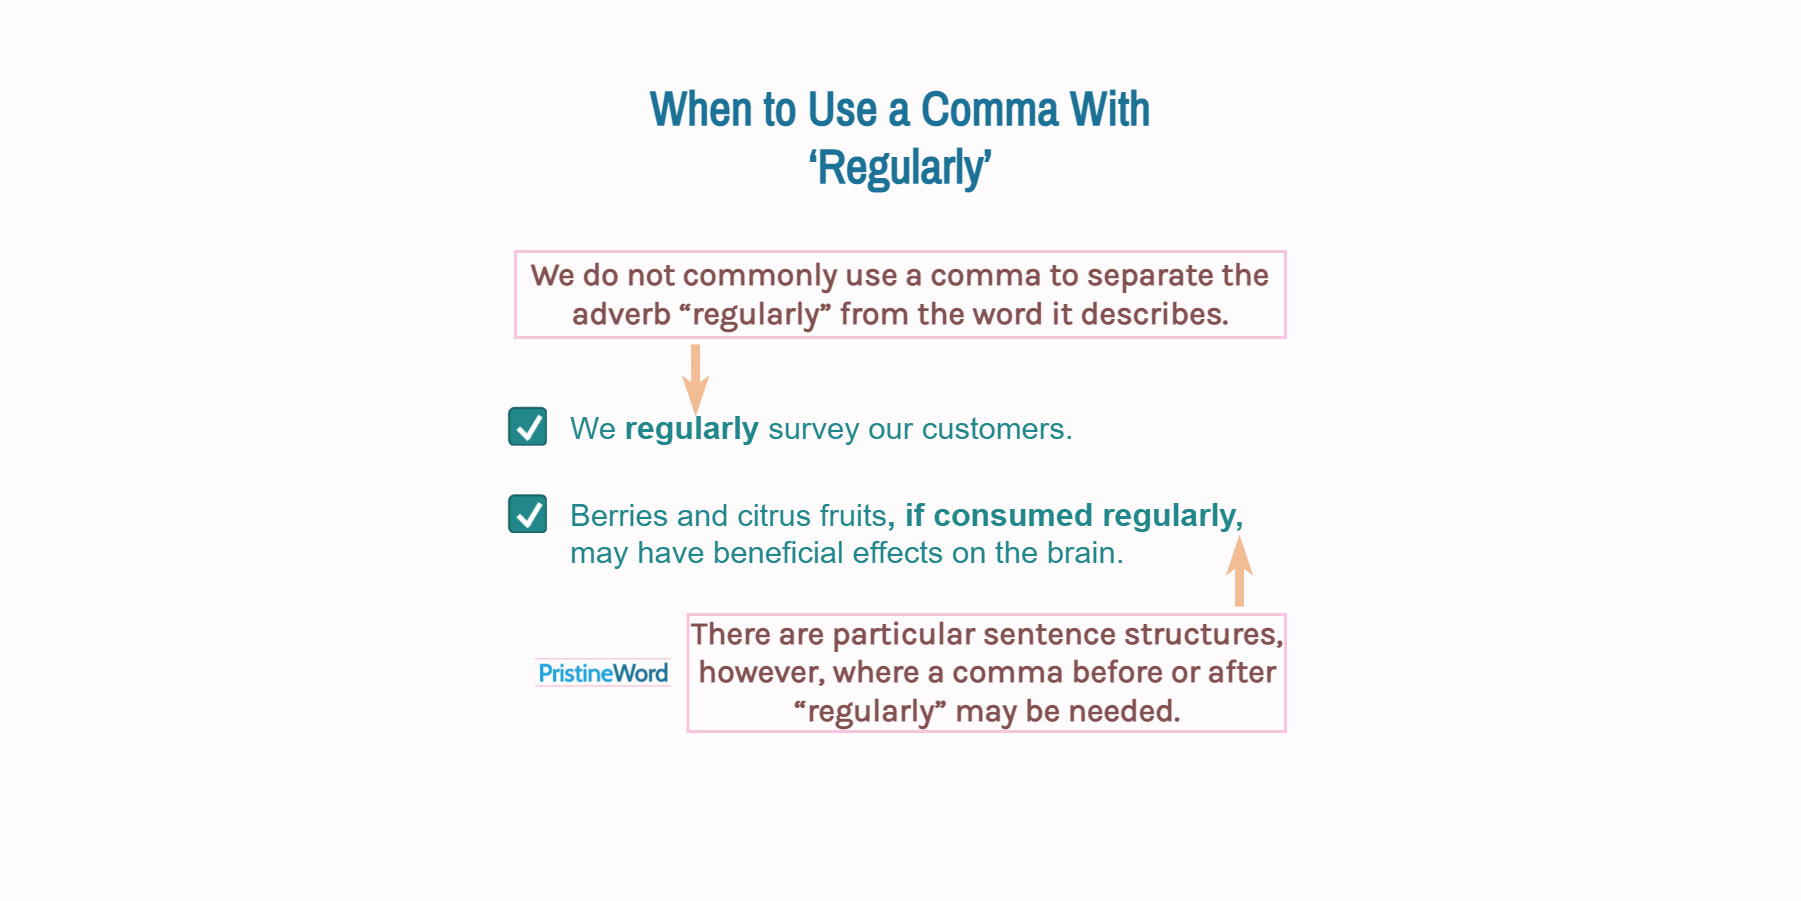 When to Use a Comma With 'Regularly'